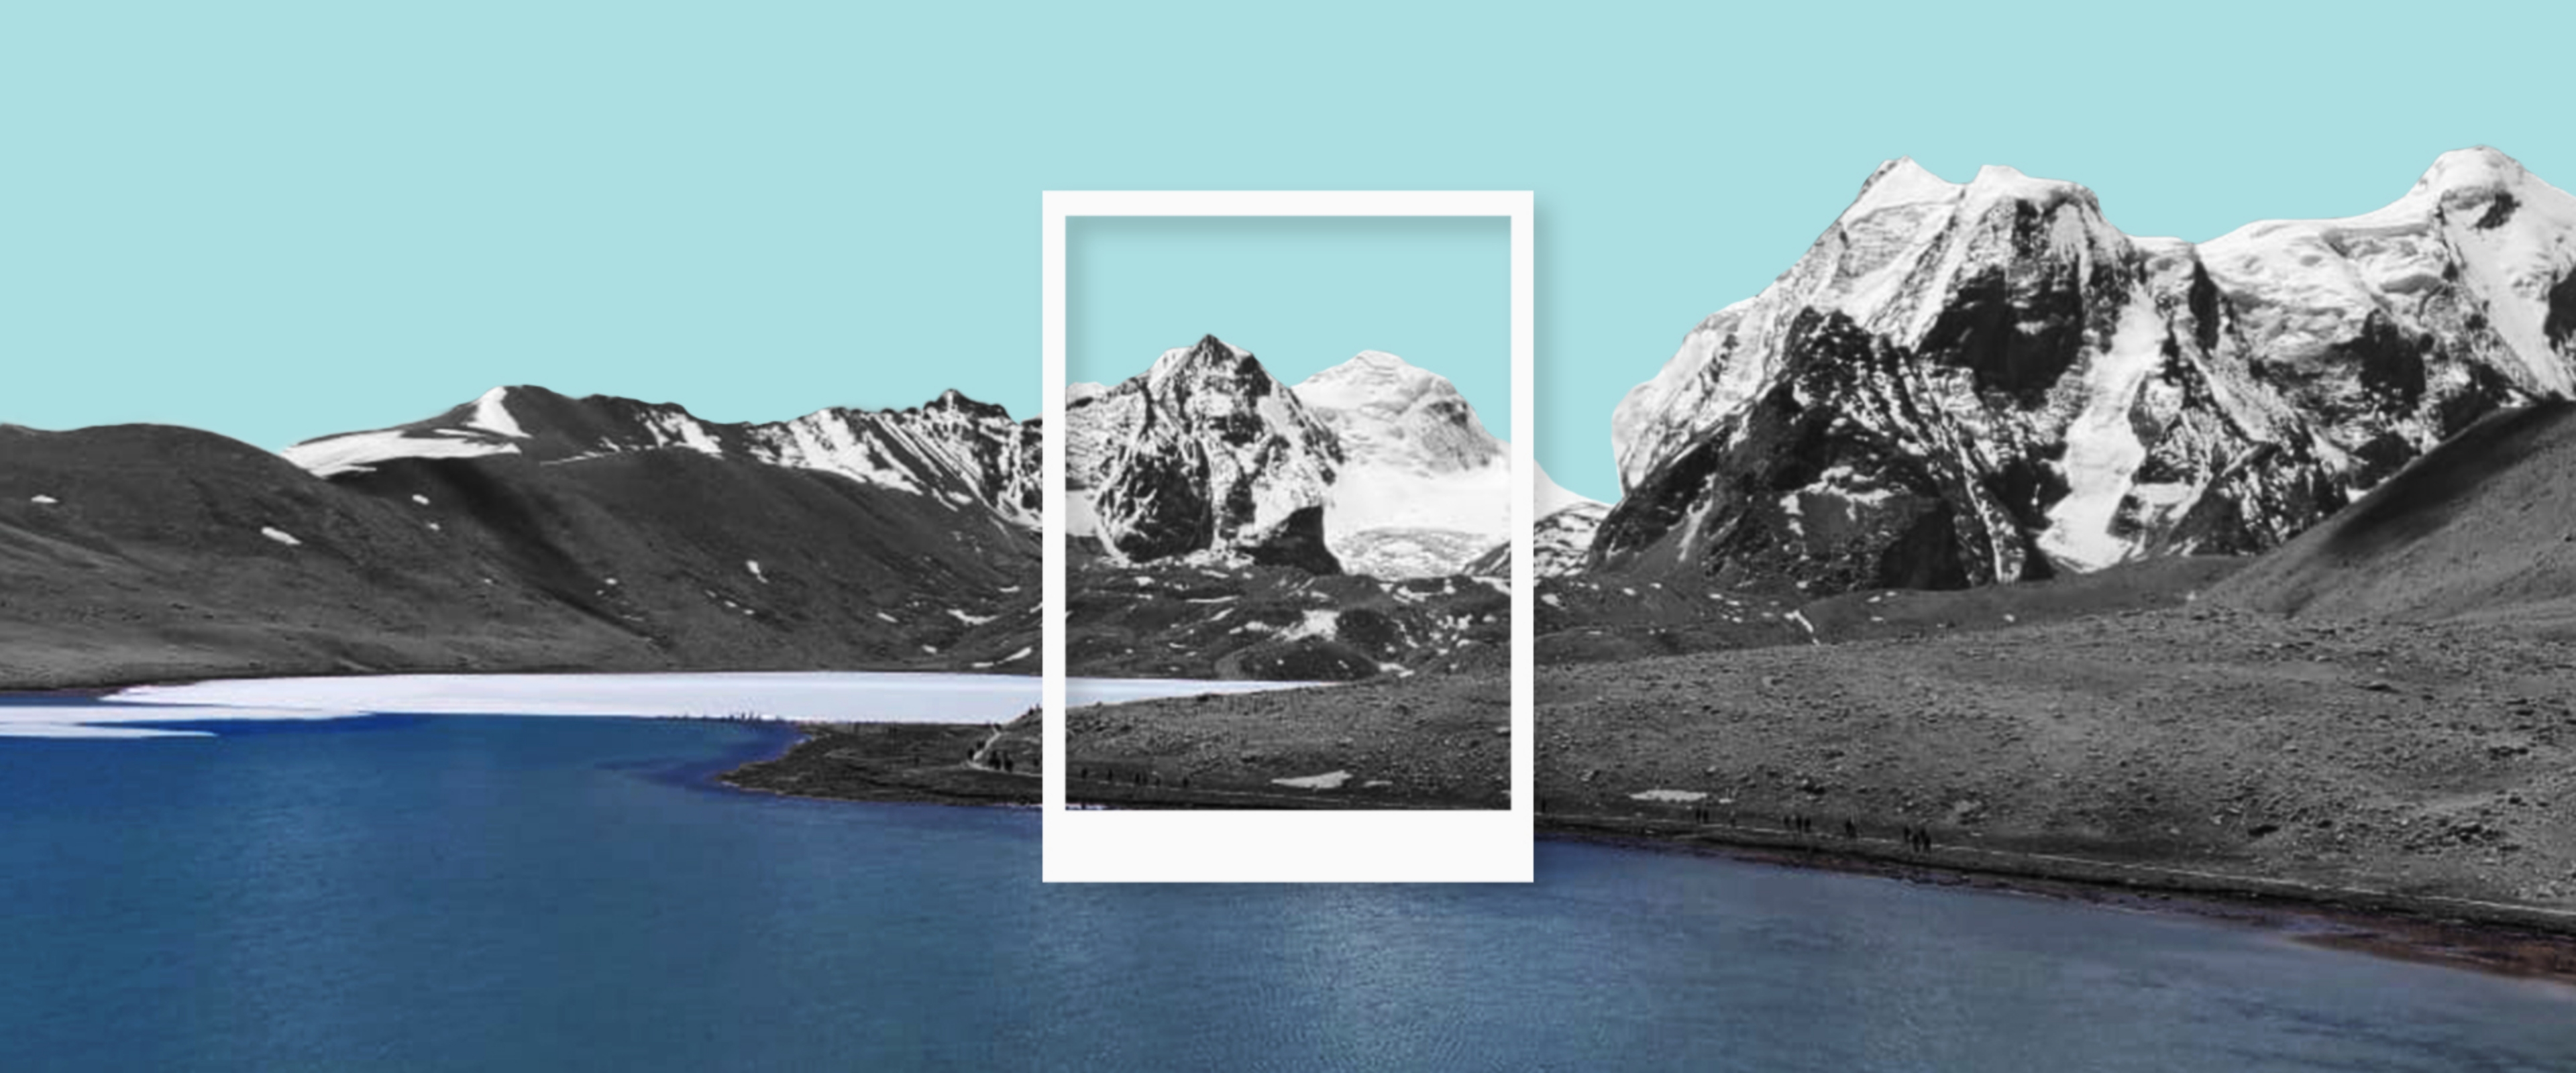 A Polaroid photo frame is centered on an image of Gurudongmar Lake in Sikkim, India.